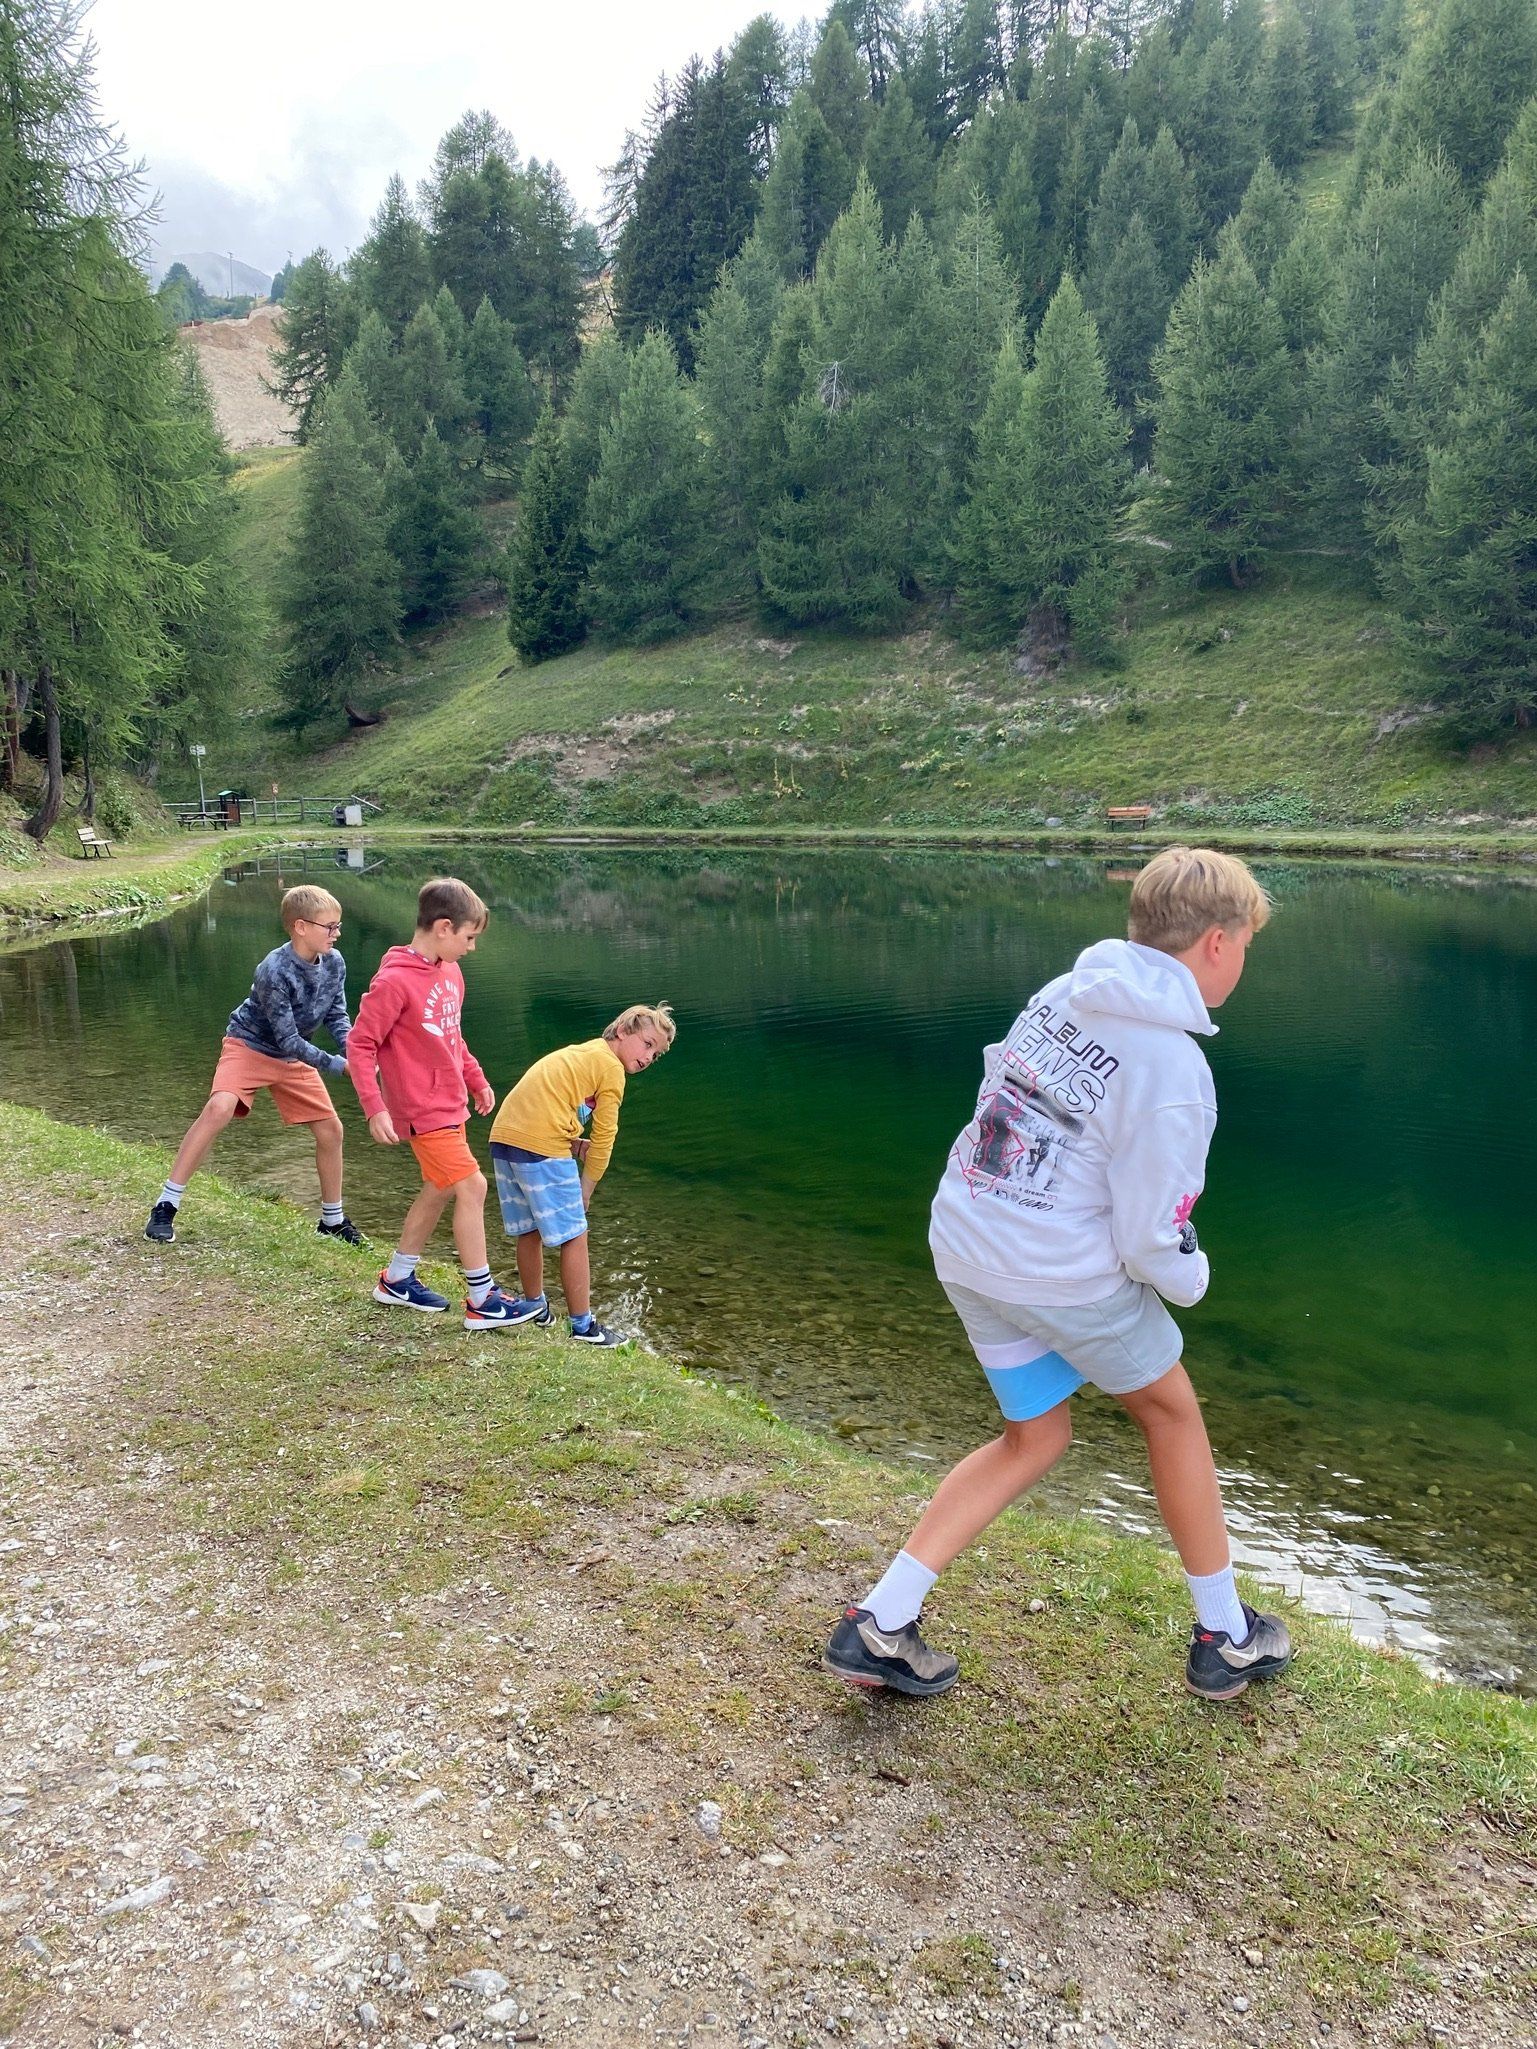 The Boys throwing Stones in Lac Vert